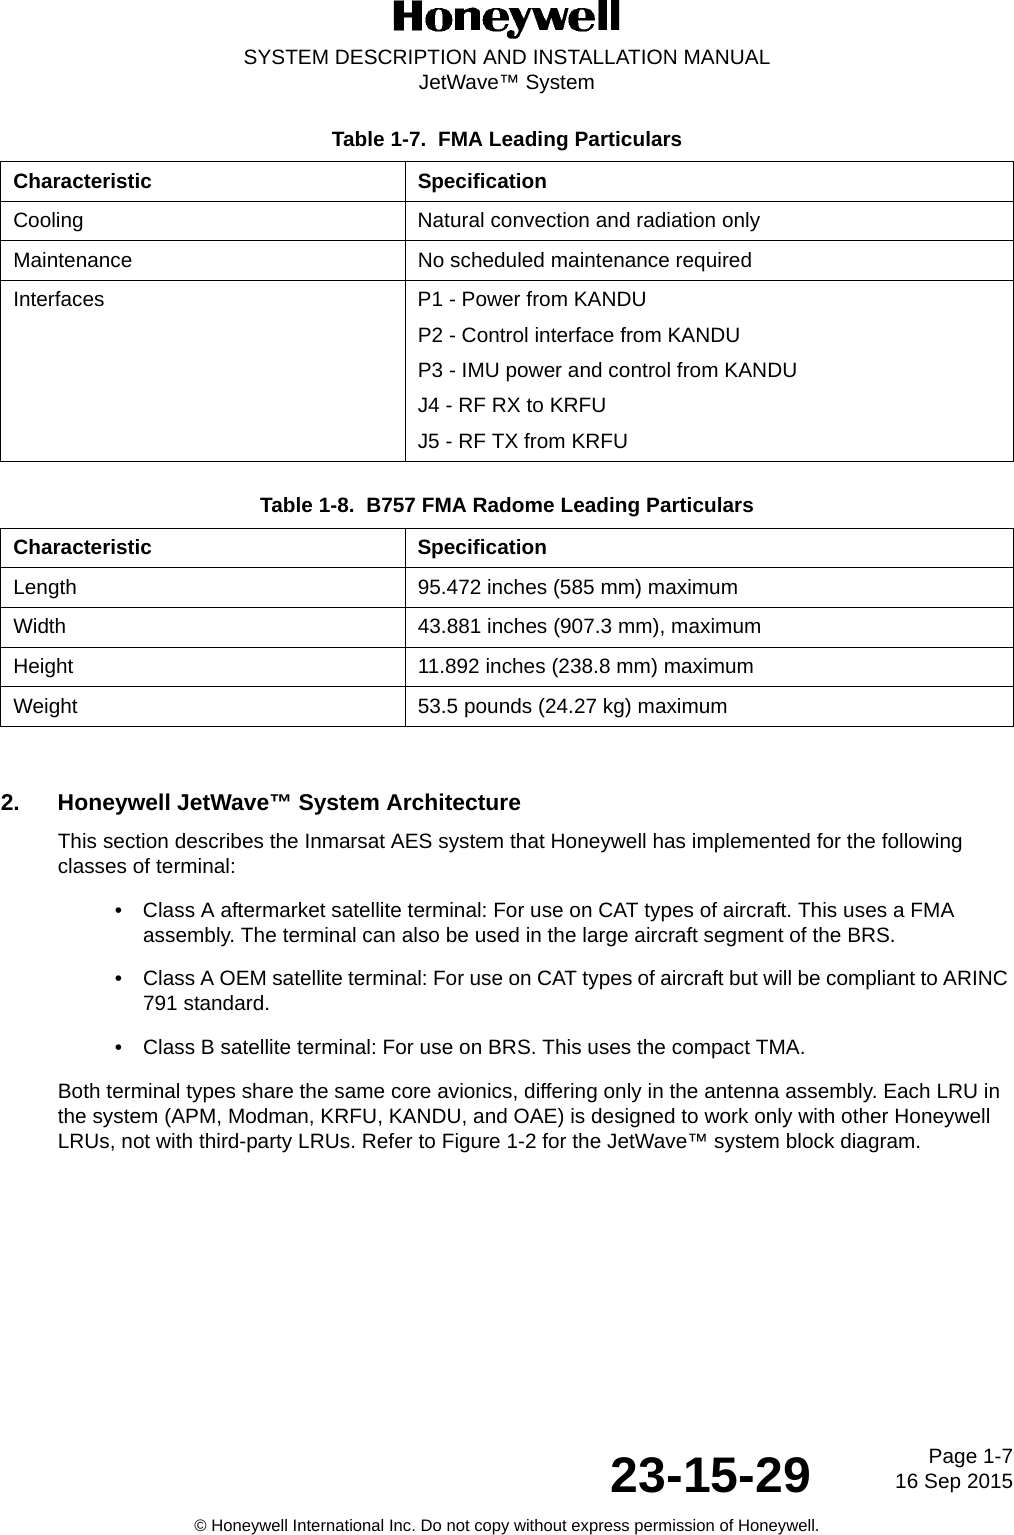 Page 1-716 Sep 201523-15-29SYSTEM DESCRIPTION AND INSTALLATION MANUALJetWave™ System© Honeywell International Inc. Do not copy without express permission of Honeywell.2. Honeywell JetWave™ System ArchitectureThis section describes the Inmarsat AES system that Honeywell has implemented for the following classes of terminal:• Class A aftermarket satellite terminal: For use on CAT types of aircraft. This uses a FMA assembly. The terminal can also be used in the large aircraft segment of the BRS.• Class A OEM satellite terminal: For use on CAT types of aircraft but will be compliant to ARINC 791 standard.• Class B satellite terminal: For use on BRS. This uses the compact TMA.Both terminal types share the same core avionics, differing only in the antenna assembly. Each LRU in the system (APM, Modman, KRFU, KANDU, and OAE) is designed to work only with other Honeywell LRUs, not with third-party LRUs. Refer to Figure 1-2 for the JetWave™ system block diagram.Cooling Natural convection and radiation onlyMaintenance No scheduled maintenance requiredInterfaces P1 - Power from KANDUP2 - Control interface from KANDUP3 - IMU power and control from KANDUJ4 - RF RX to KRFUJ5 - RF TX from KRFUTable 1-8.  B757 FMA Radome Leading ParticularsCharacteristic SpecificationLength 95.472 inches (585 mm) maximumWidth 43.881 inches (907.3 mm), maximum Height 11.892 inches (238.8 mm) maximumWeight 53.5 pounds (24.27 kg) maximumTable 1-7.  FMA Leading ParticularsCharacteristic Specification